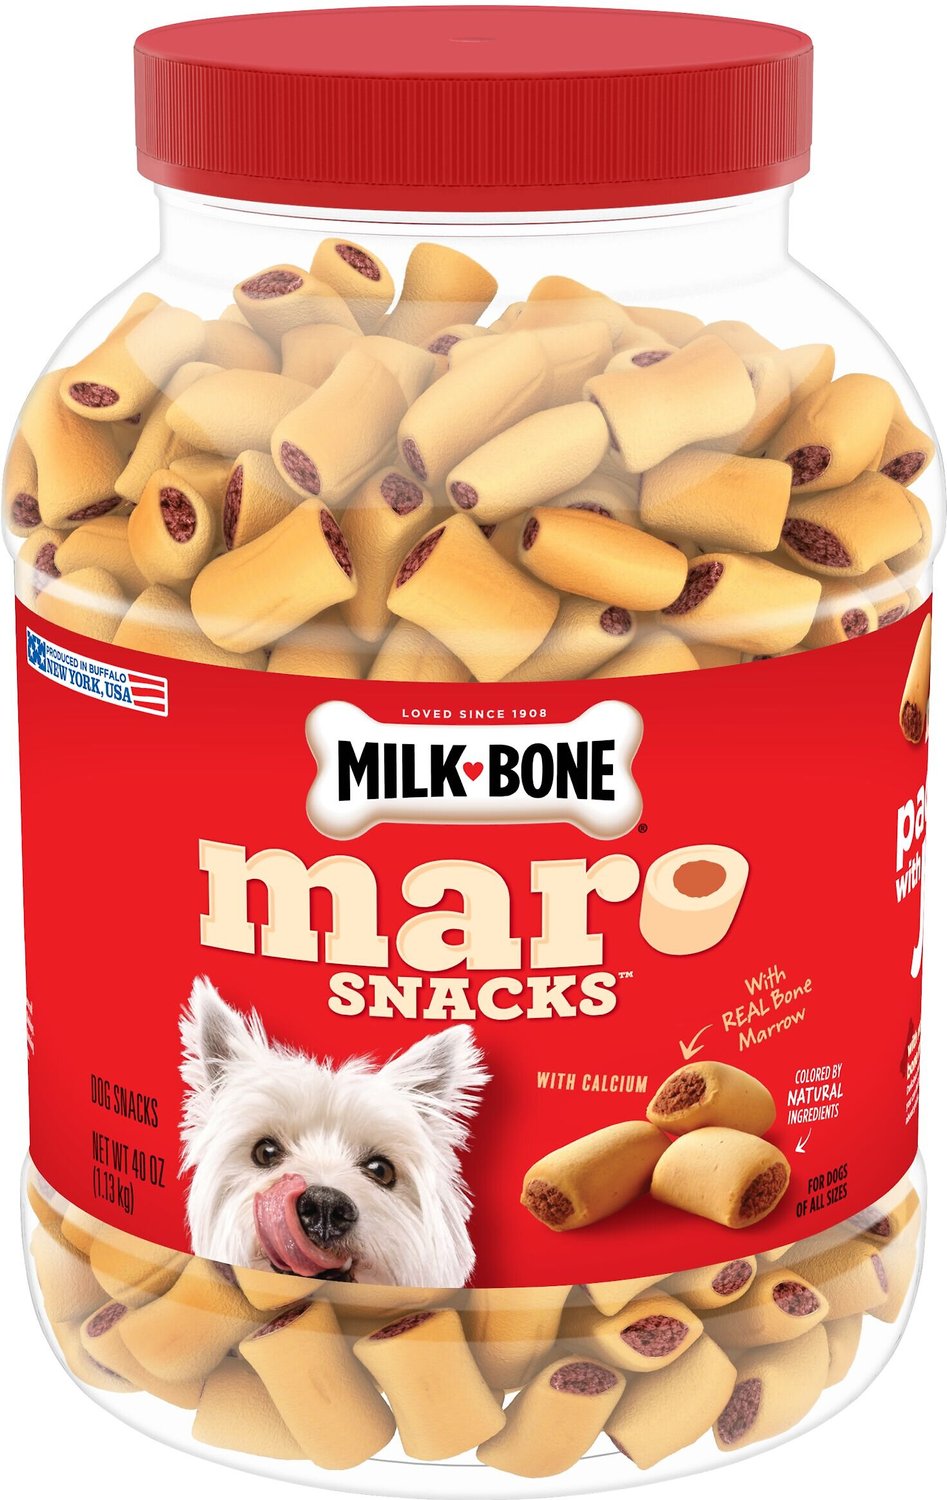 small dog biscuits